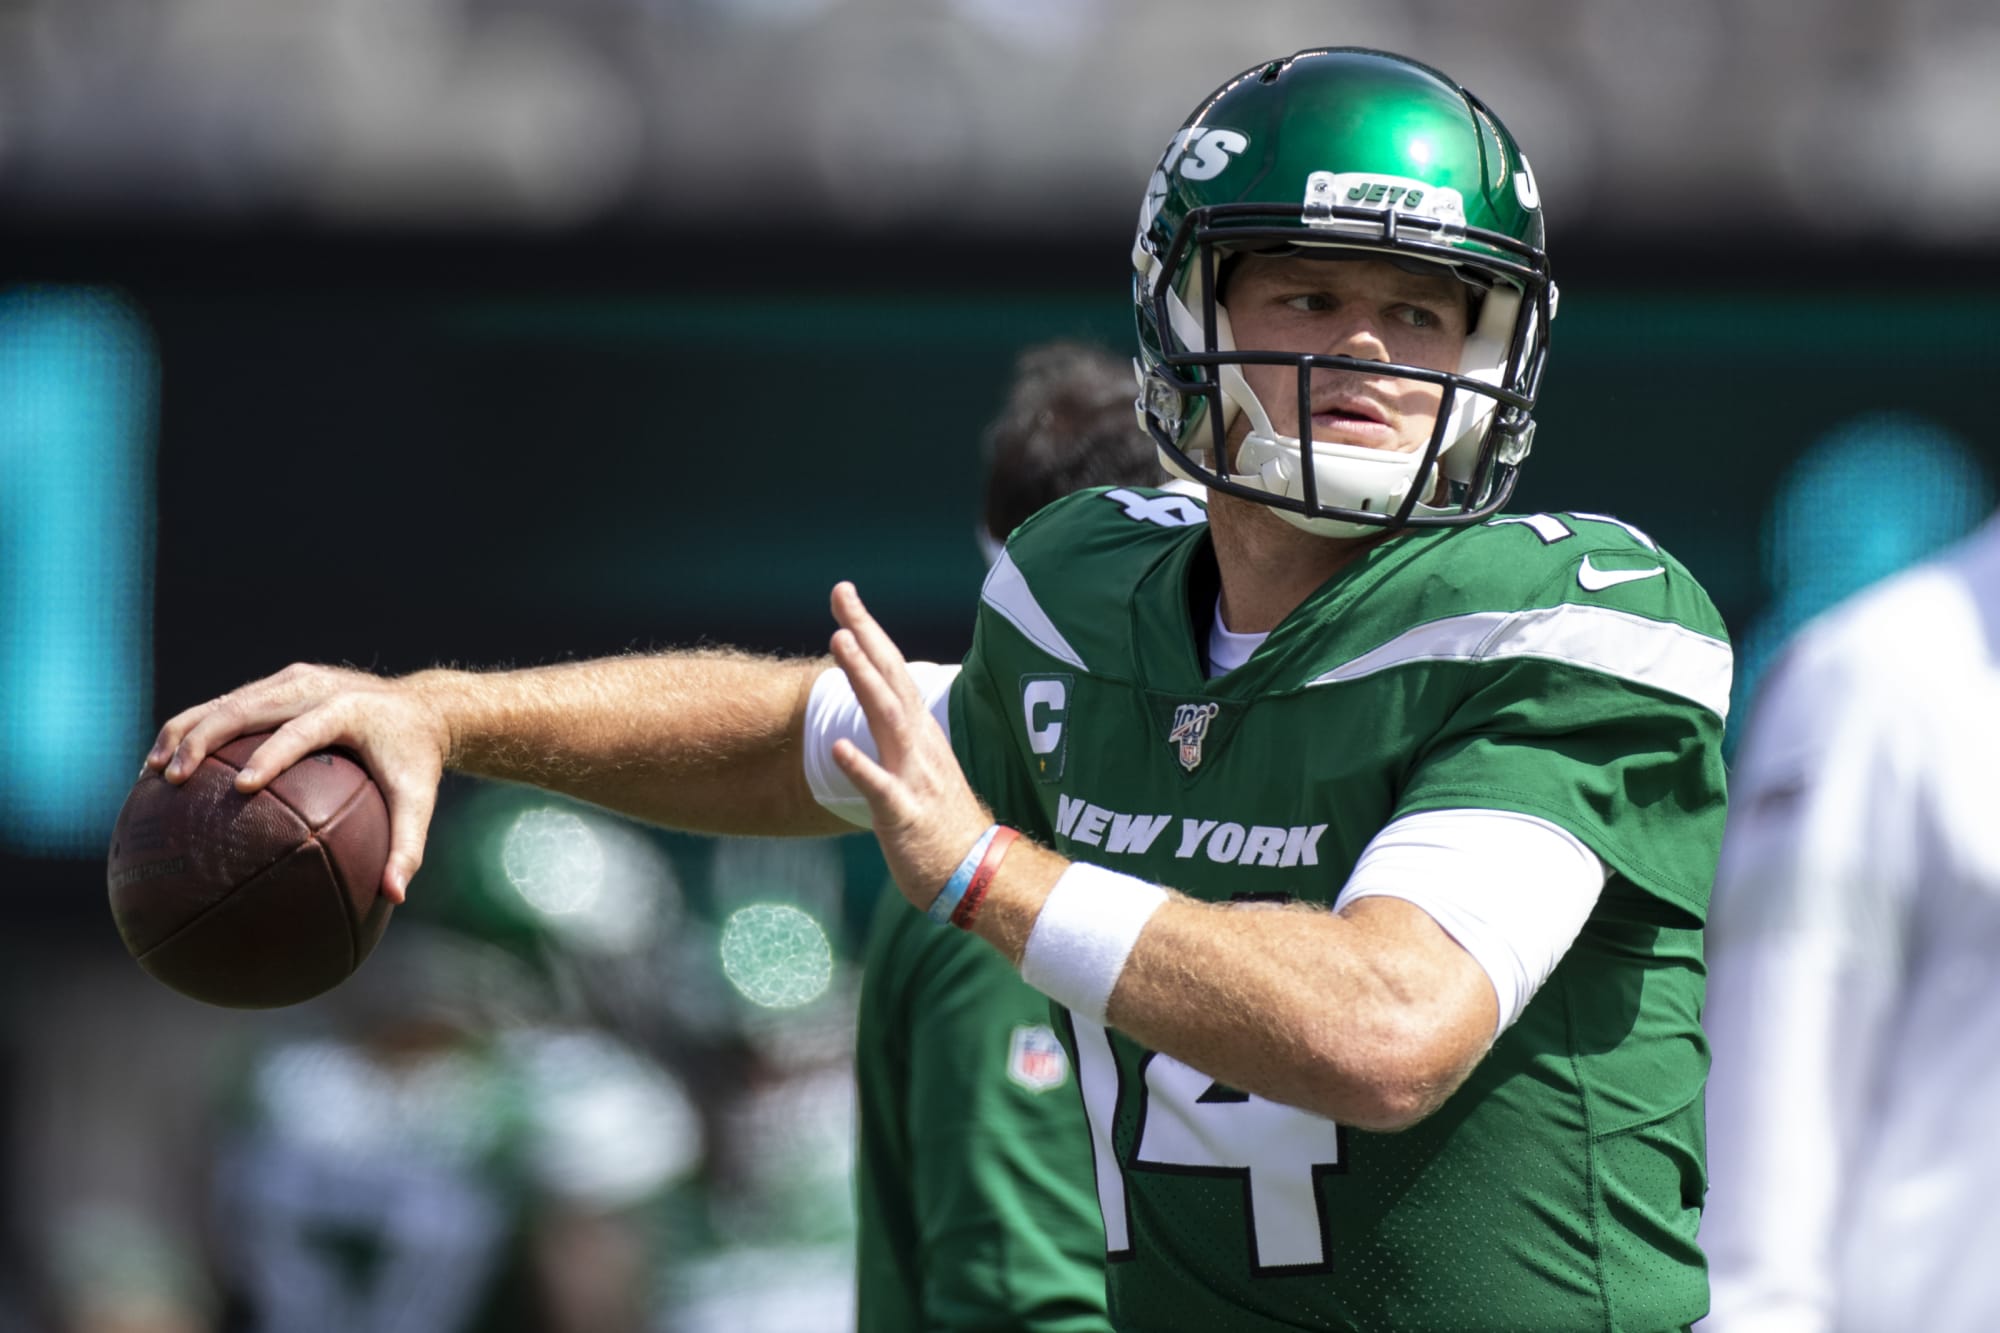 New York Jets Bye week mercifully comes at the right time